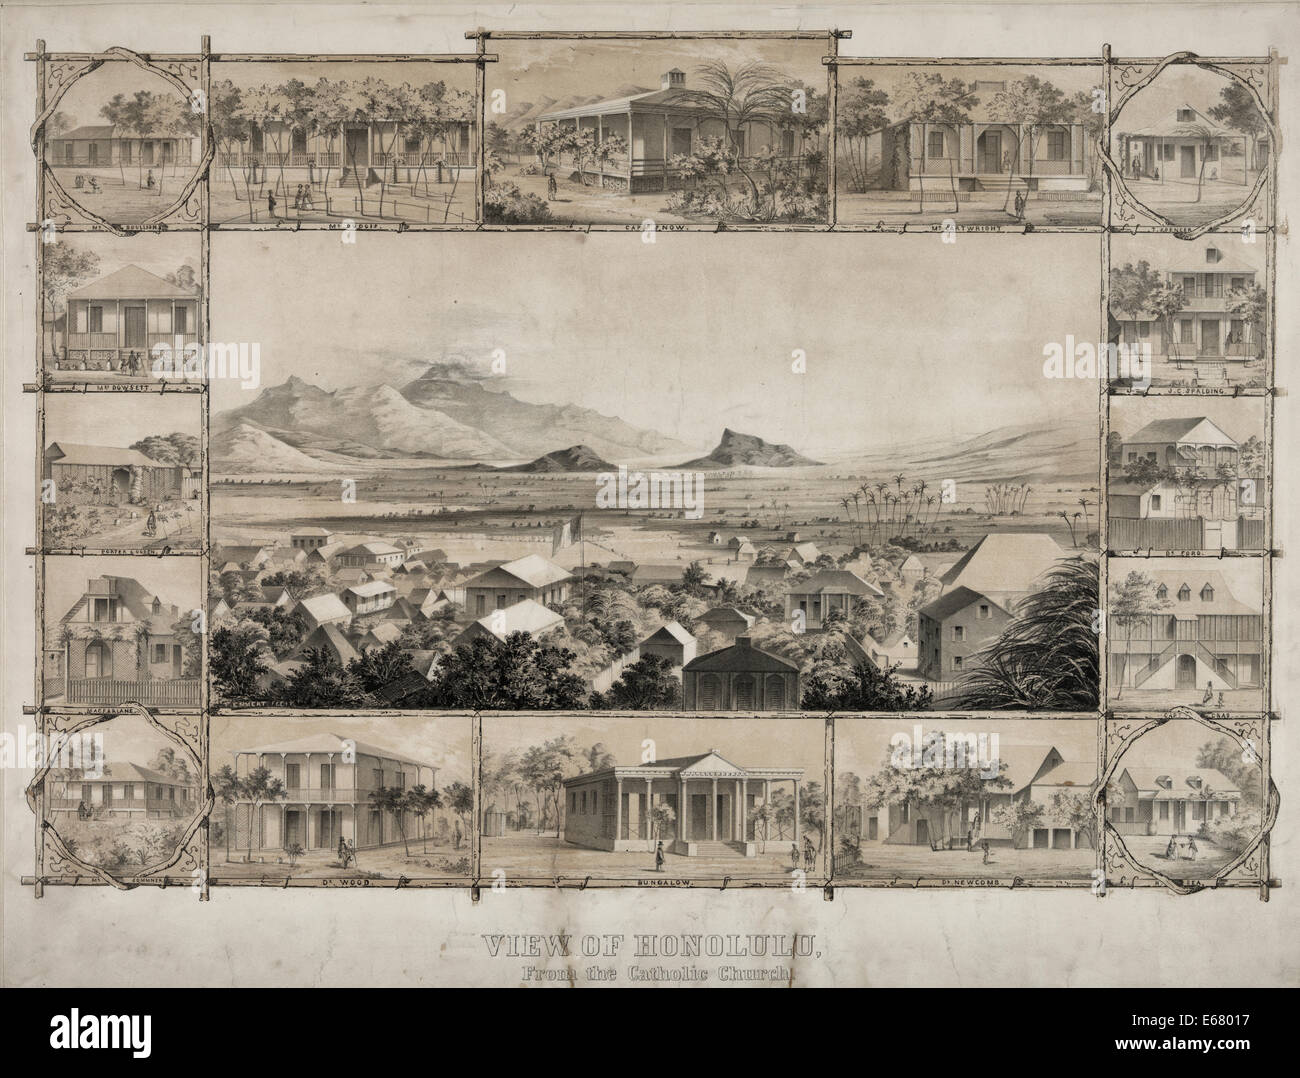 View of Honolulu, from the Catholic Church, circa 1854. Views of homes and residences: Mr. Boullion, Mr. Dudois, Capt. Snow, Mr. Cartwright, T. Spencer, J.C. Spalding, Dr. Ford, Capt. Crab, H. Sea, Dr. Newcomb, Dr. Wood, Mr. Sommer, Macfarlane, Porter & Ogden, Mrs. Dowsett. Stock Photo